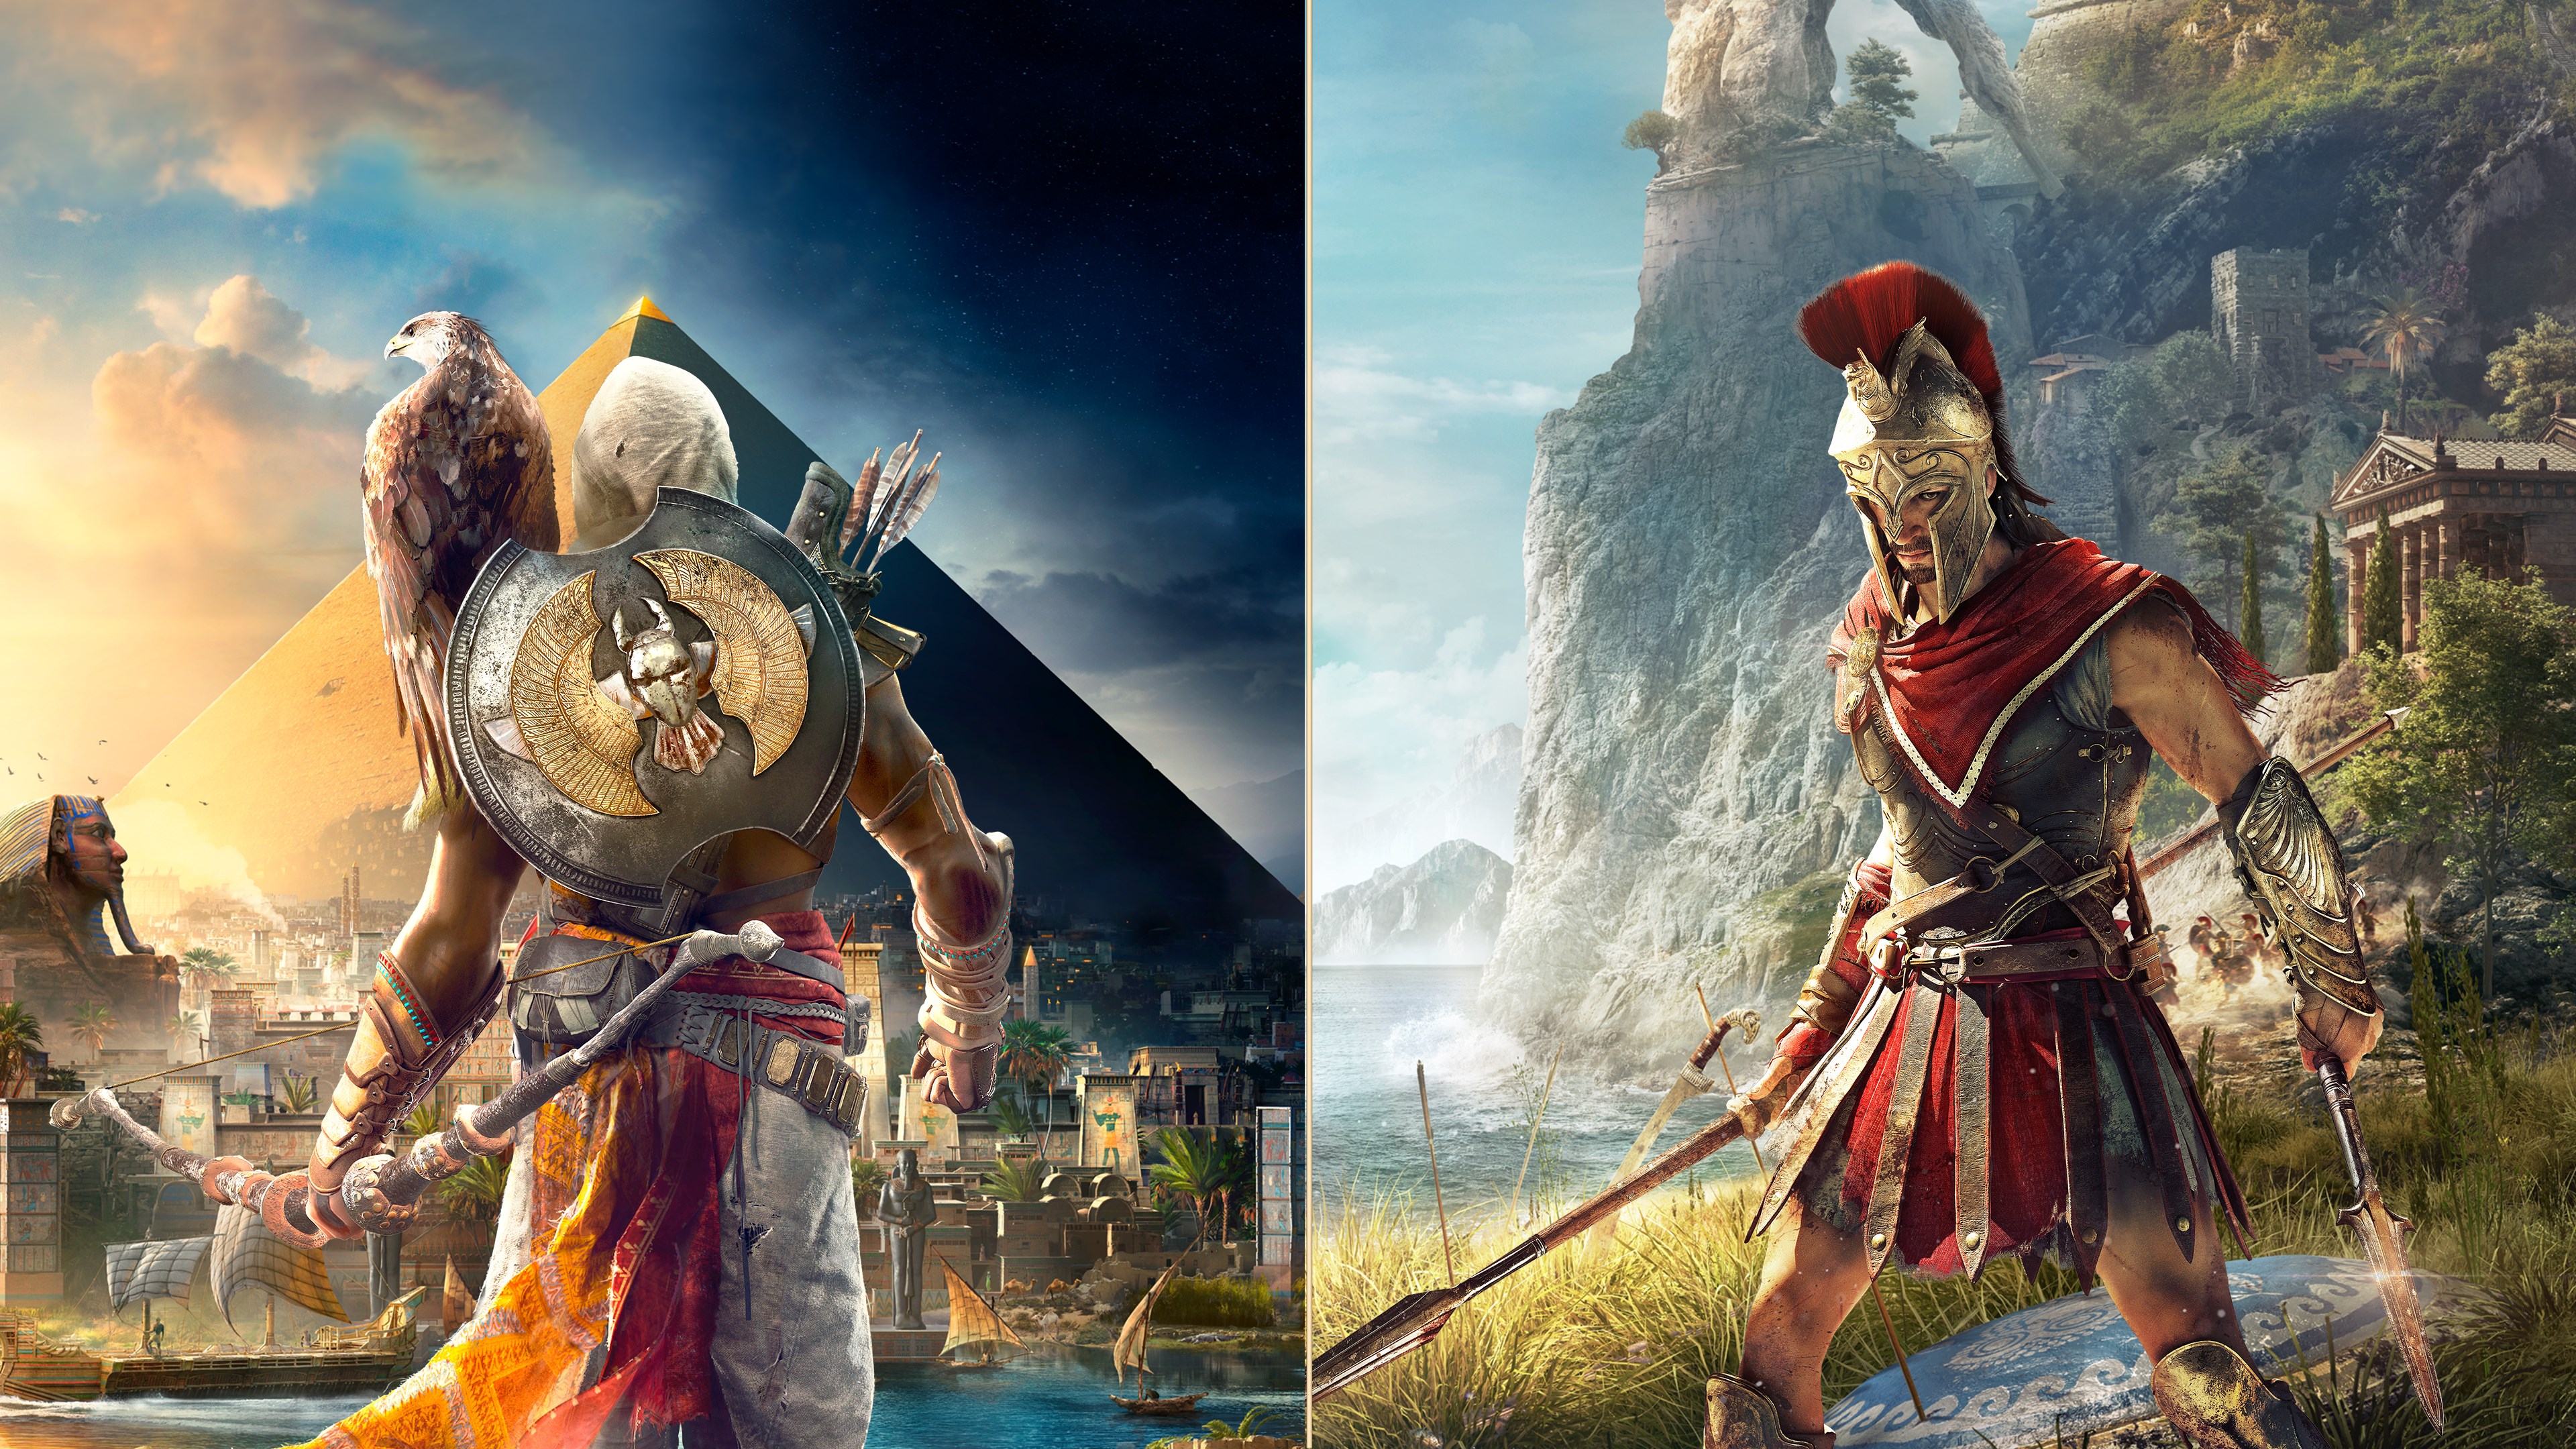 microsoft store assassin's creed odyssey